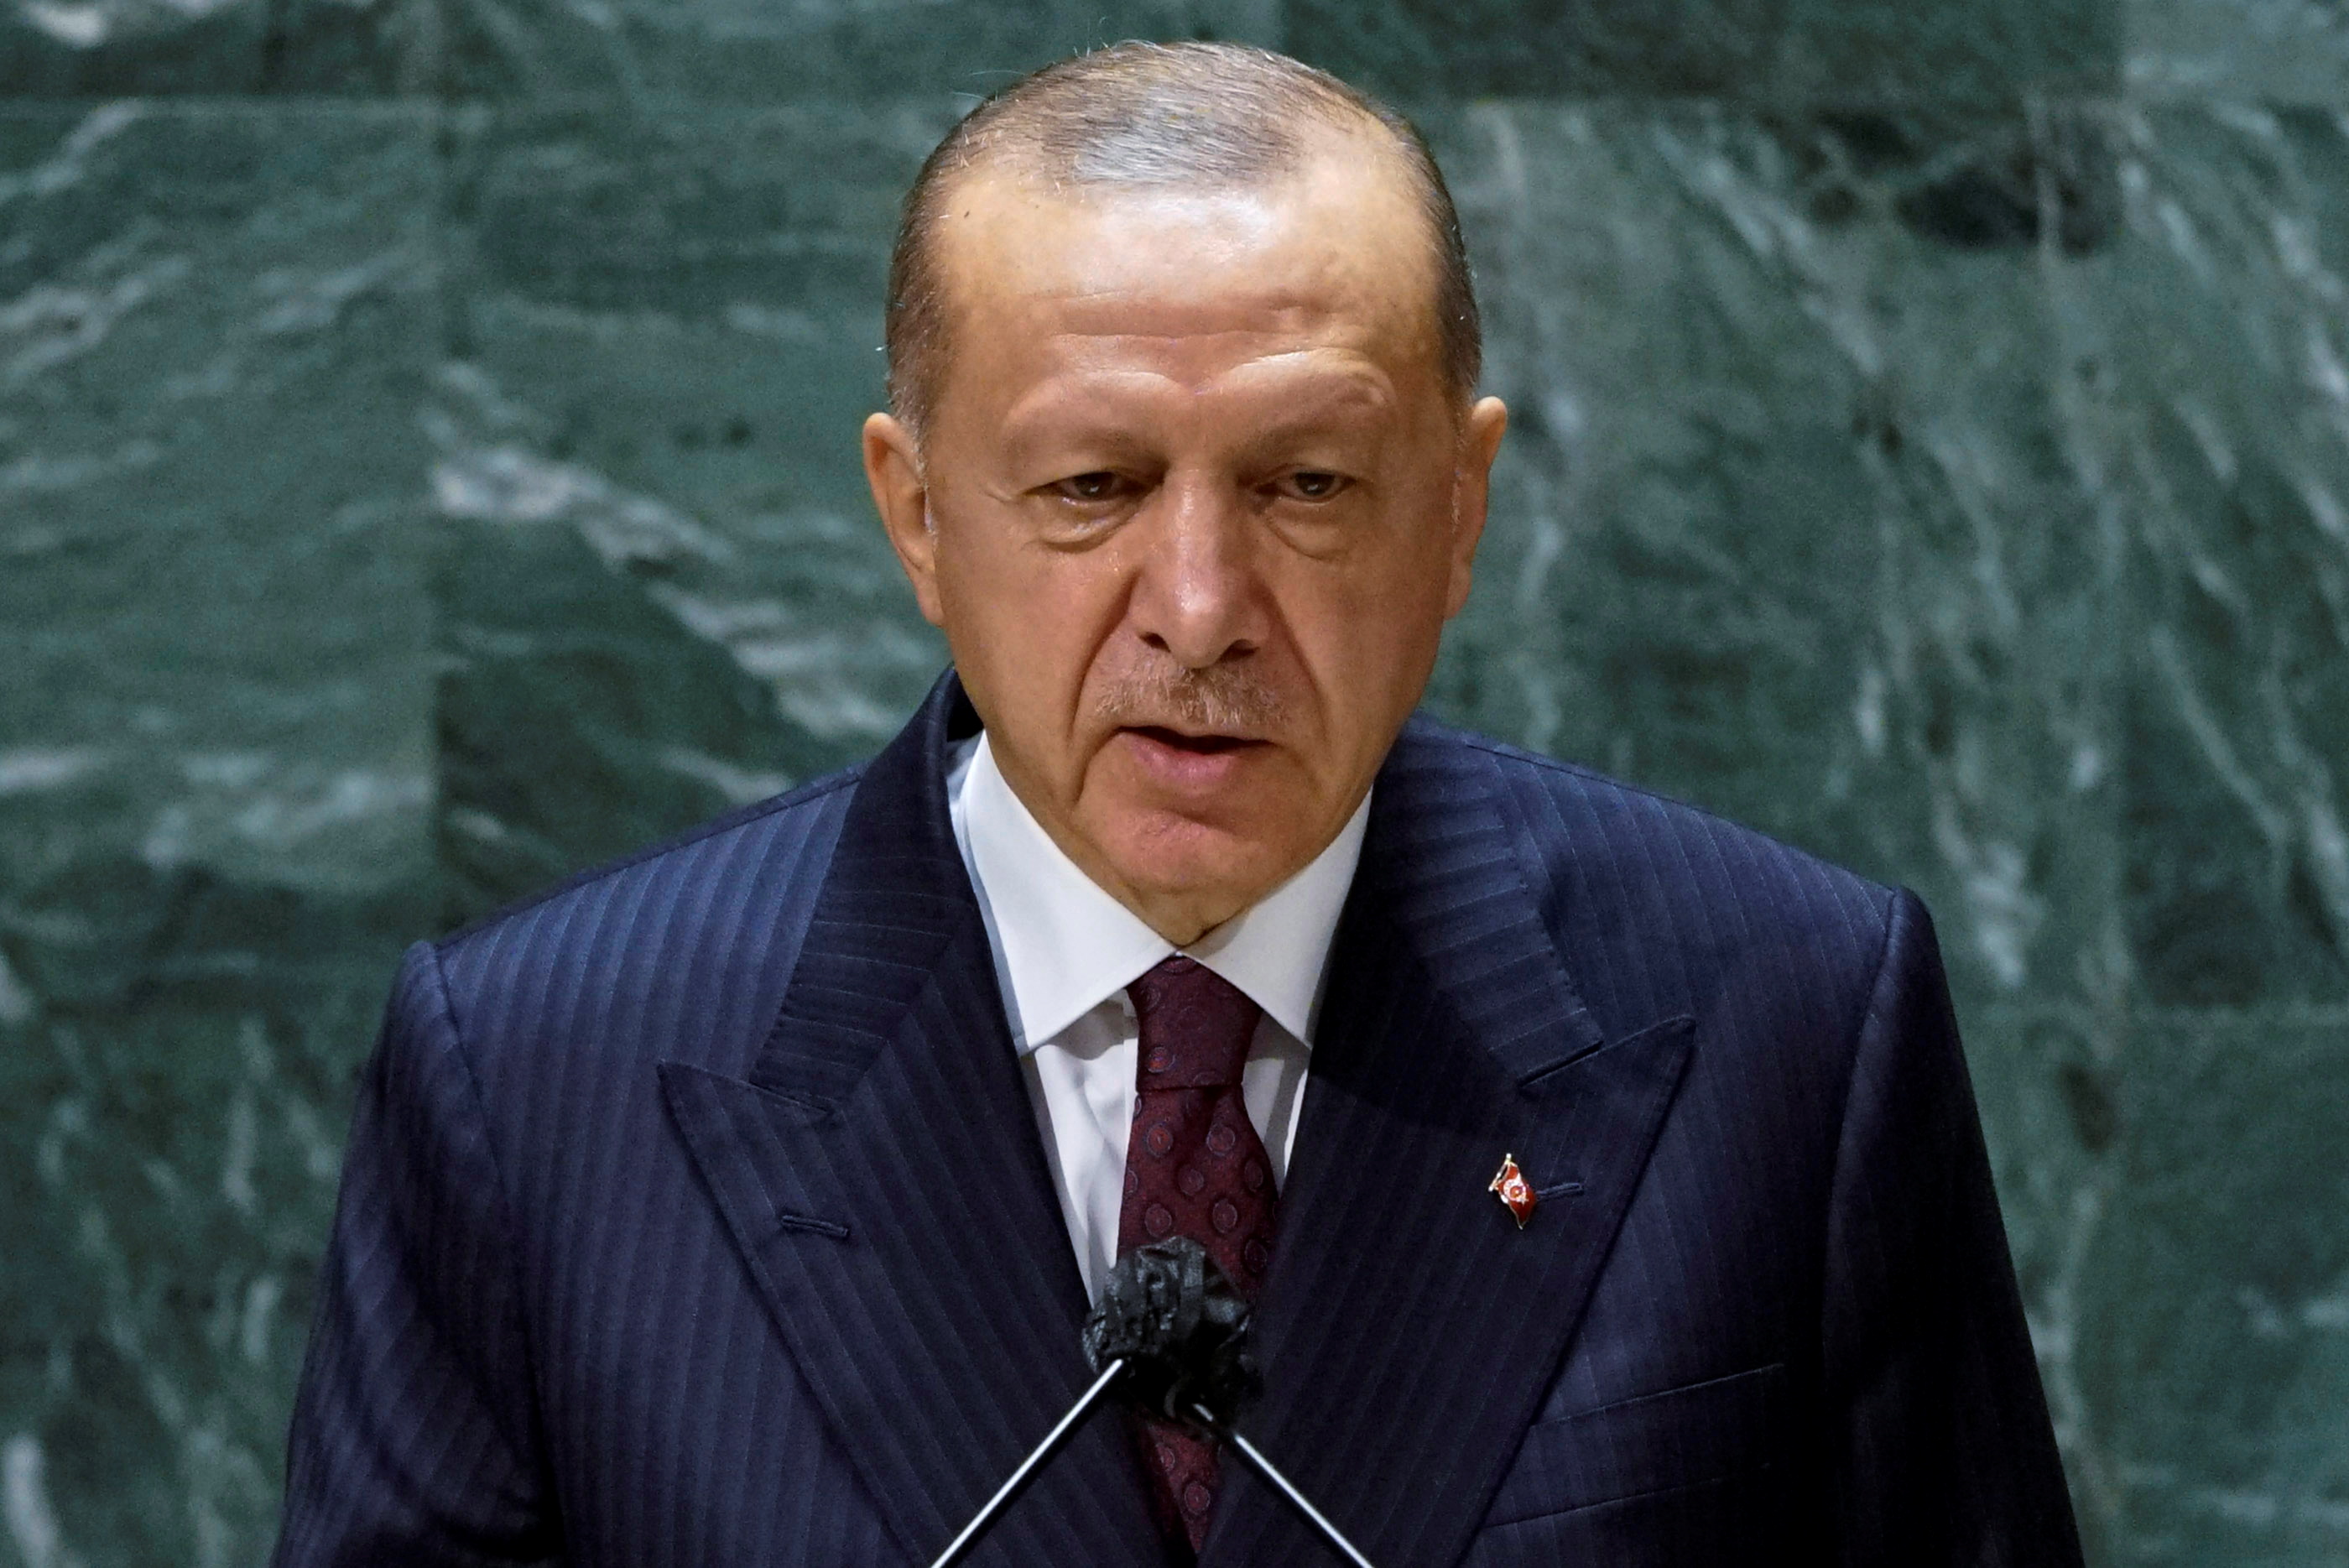 Turkish President Tayyip Erdogan addresses 76th Session of the U.N. General Assembly in New York City